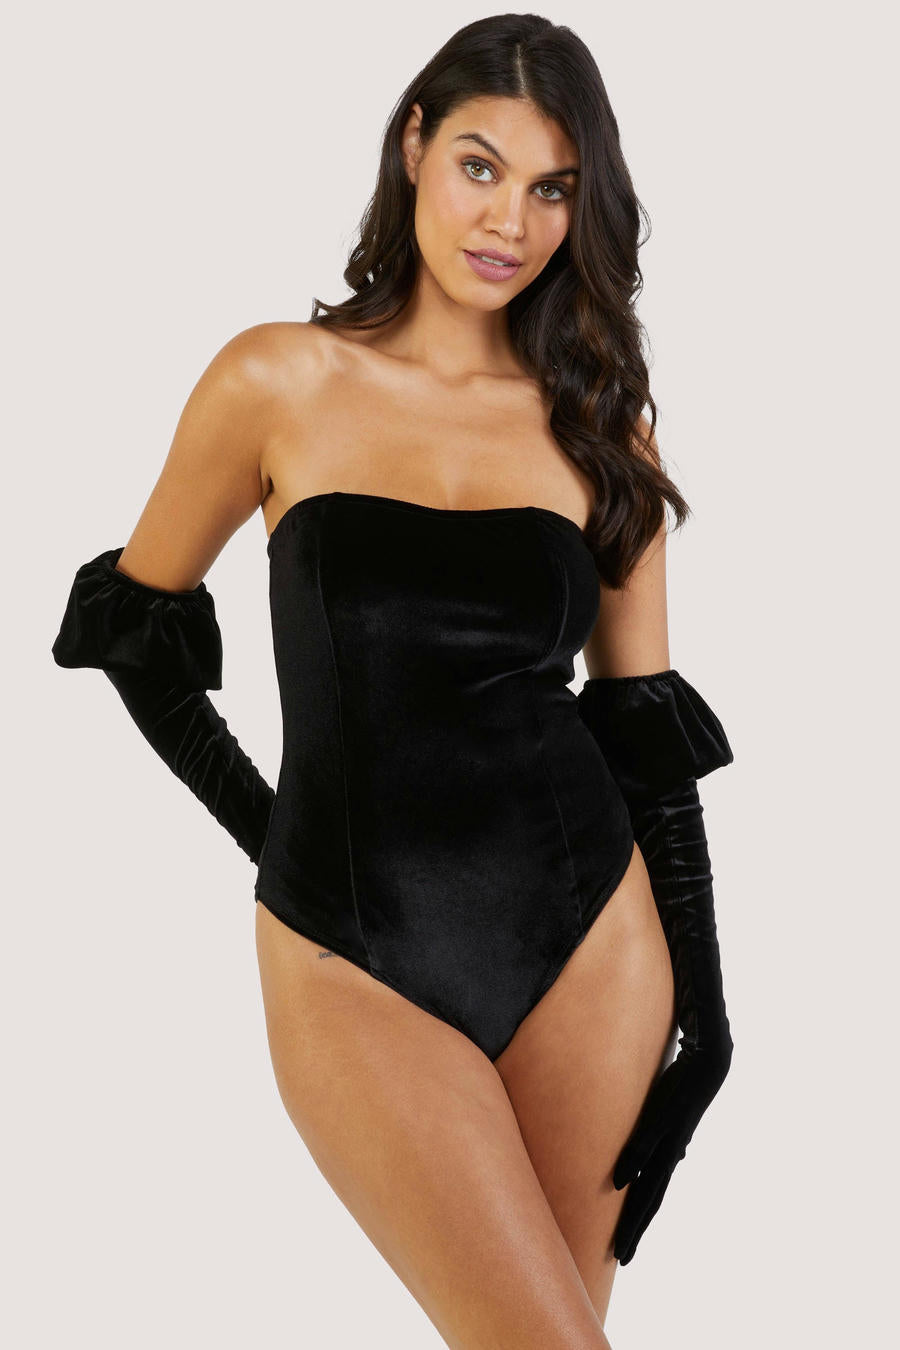 Halina Velvet Bodysuit with puff sleeve gloves by Playful Promises - sizes 4-16